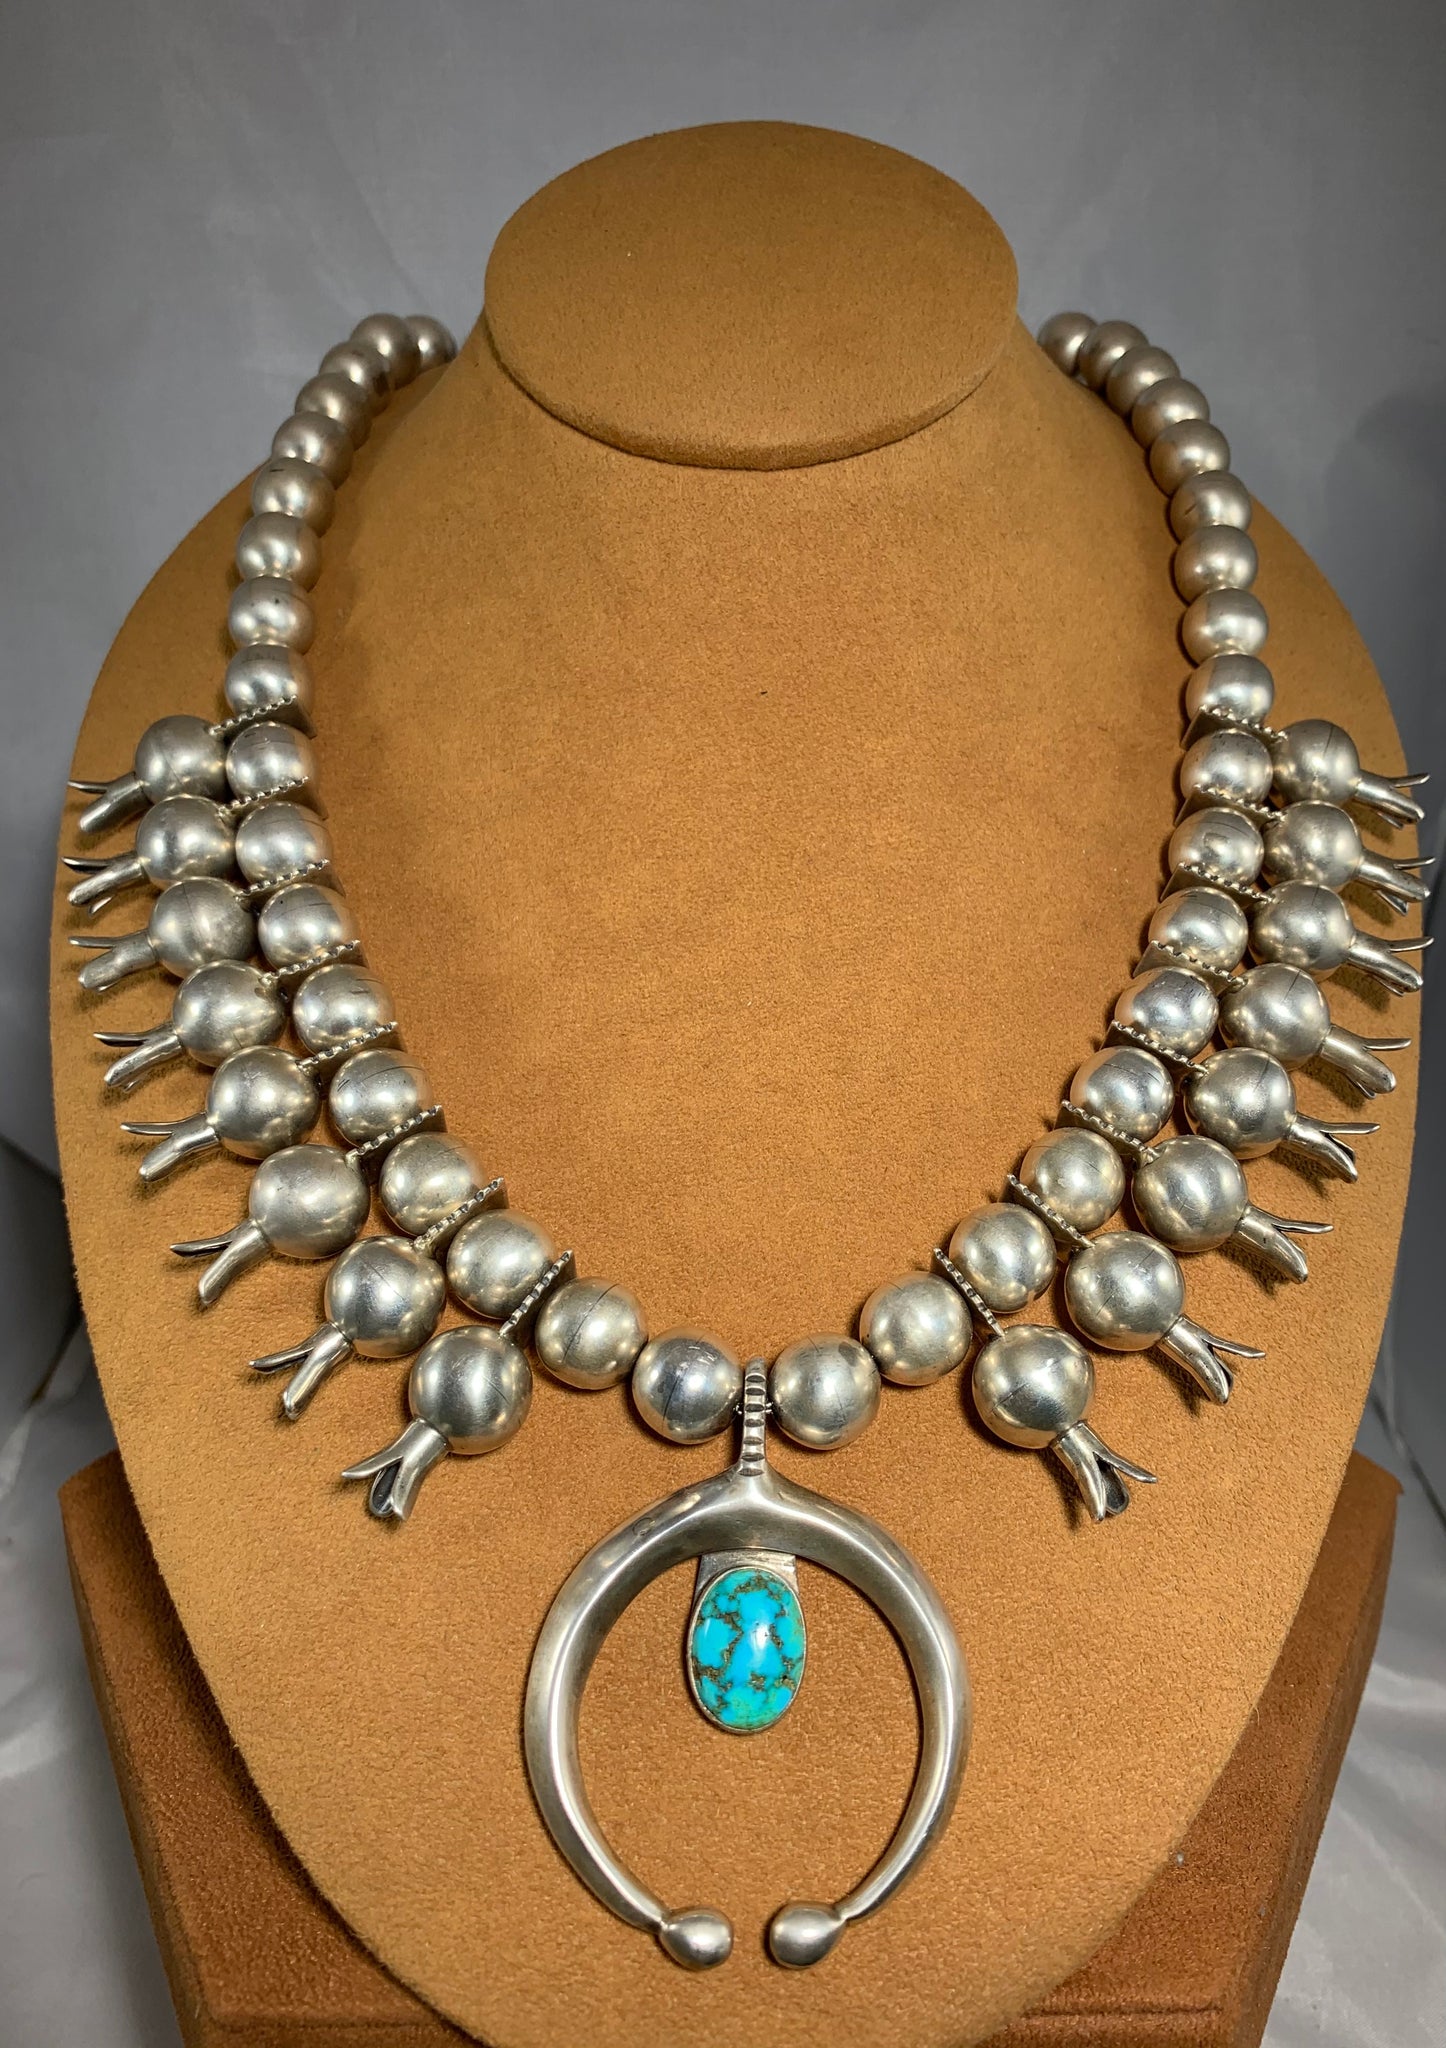 Sterling Silver Squash Blossom Necklace with Kingman Turquoise by Don Lucas